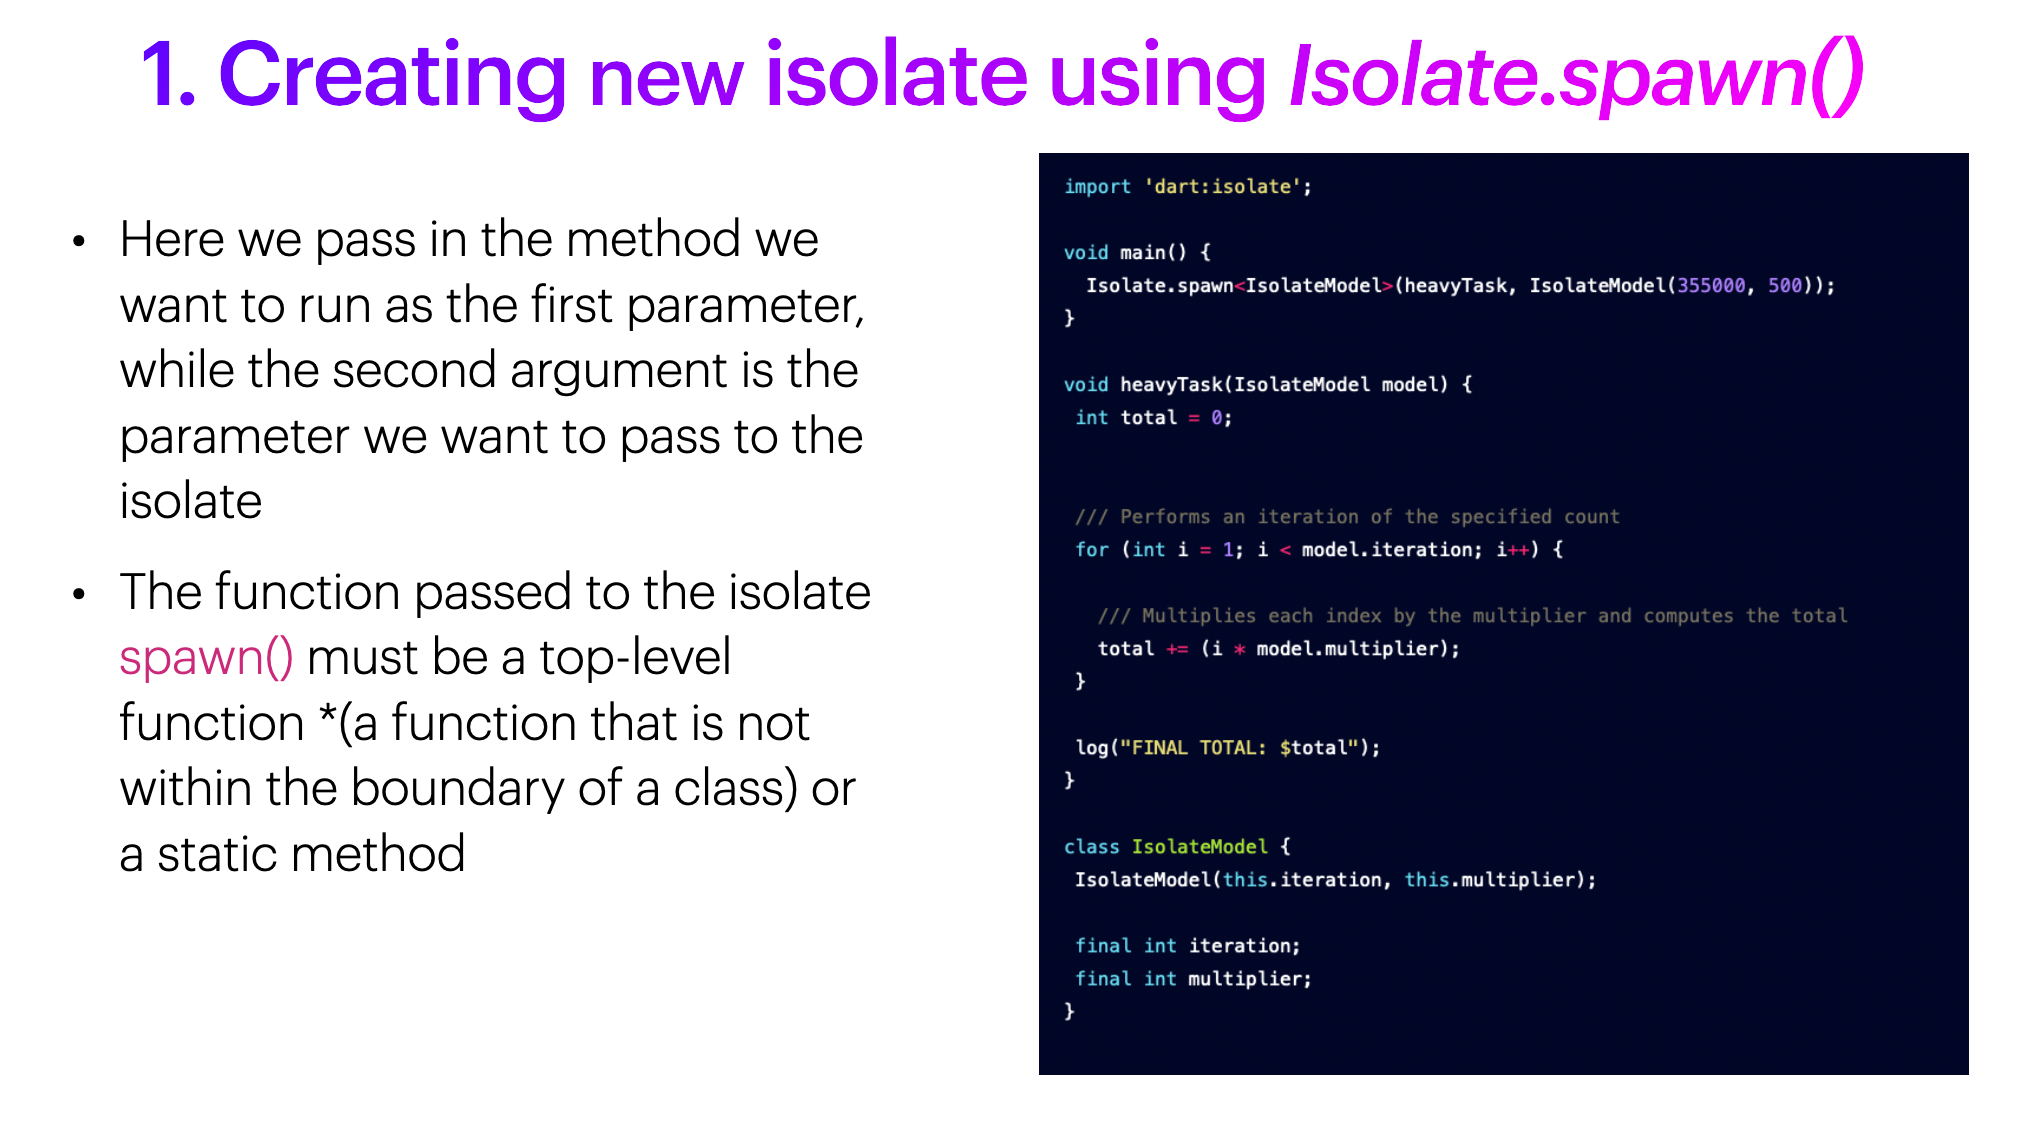 Creating New Isolate Using Isolate.spawn()